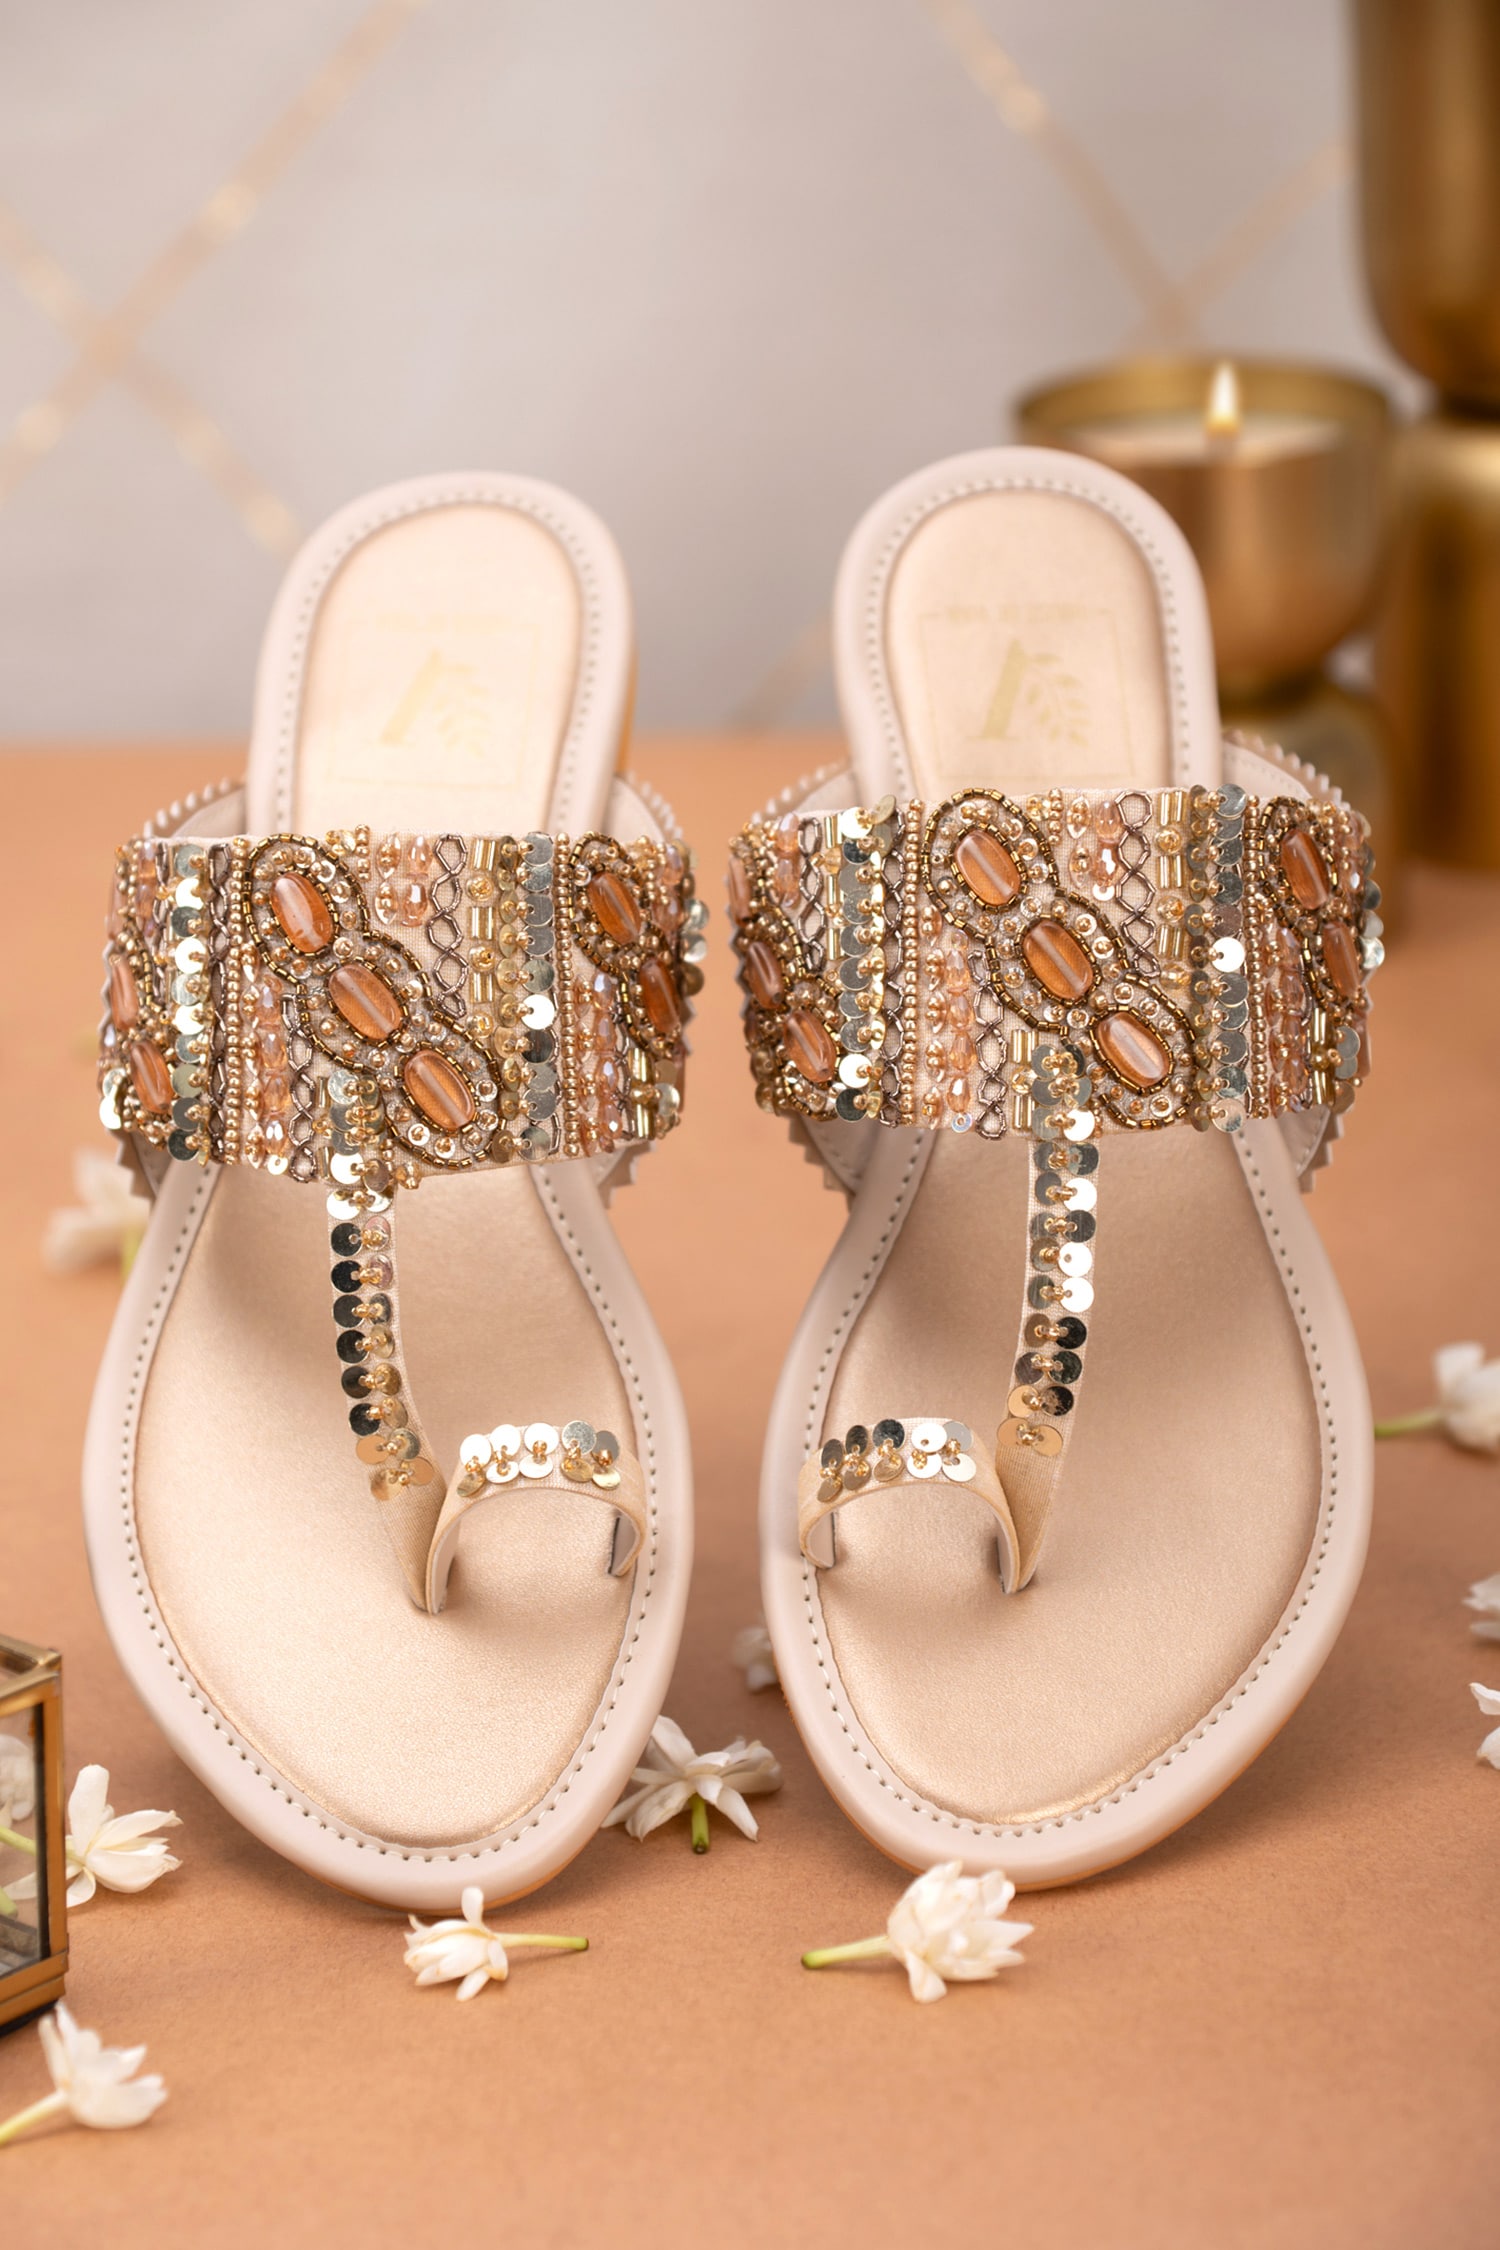 9 Fancy Sandals to Wear to a Wedding